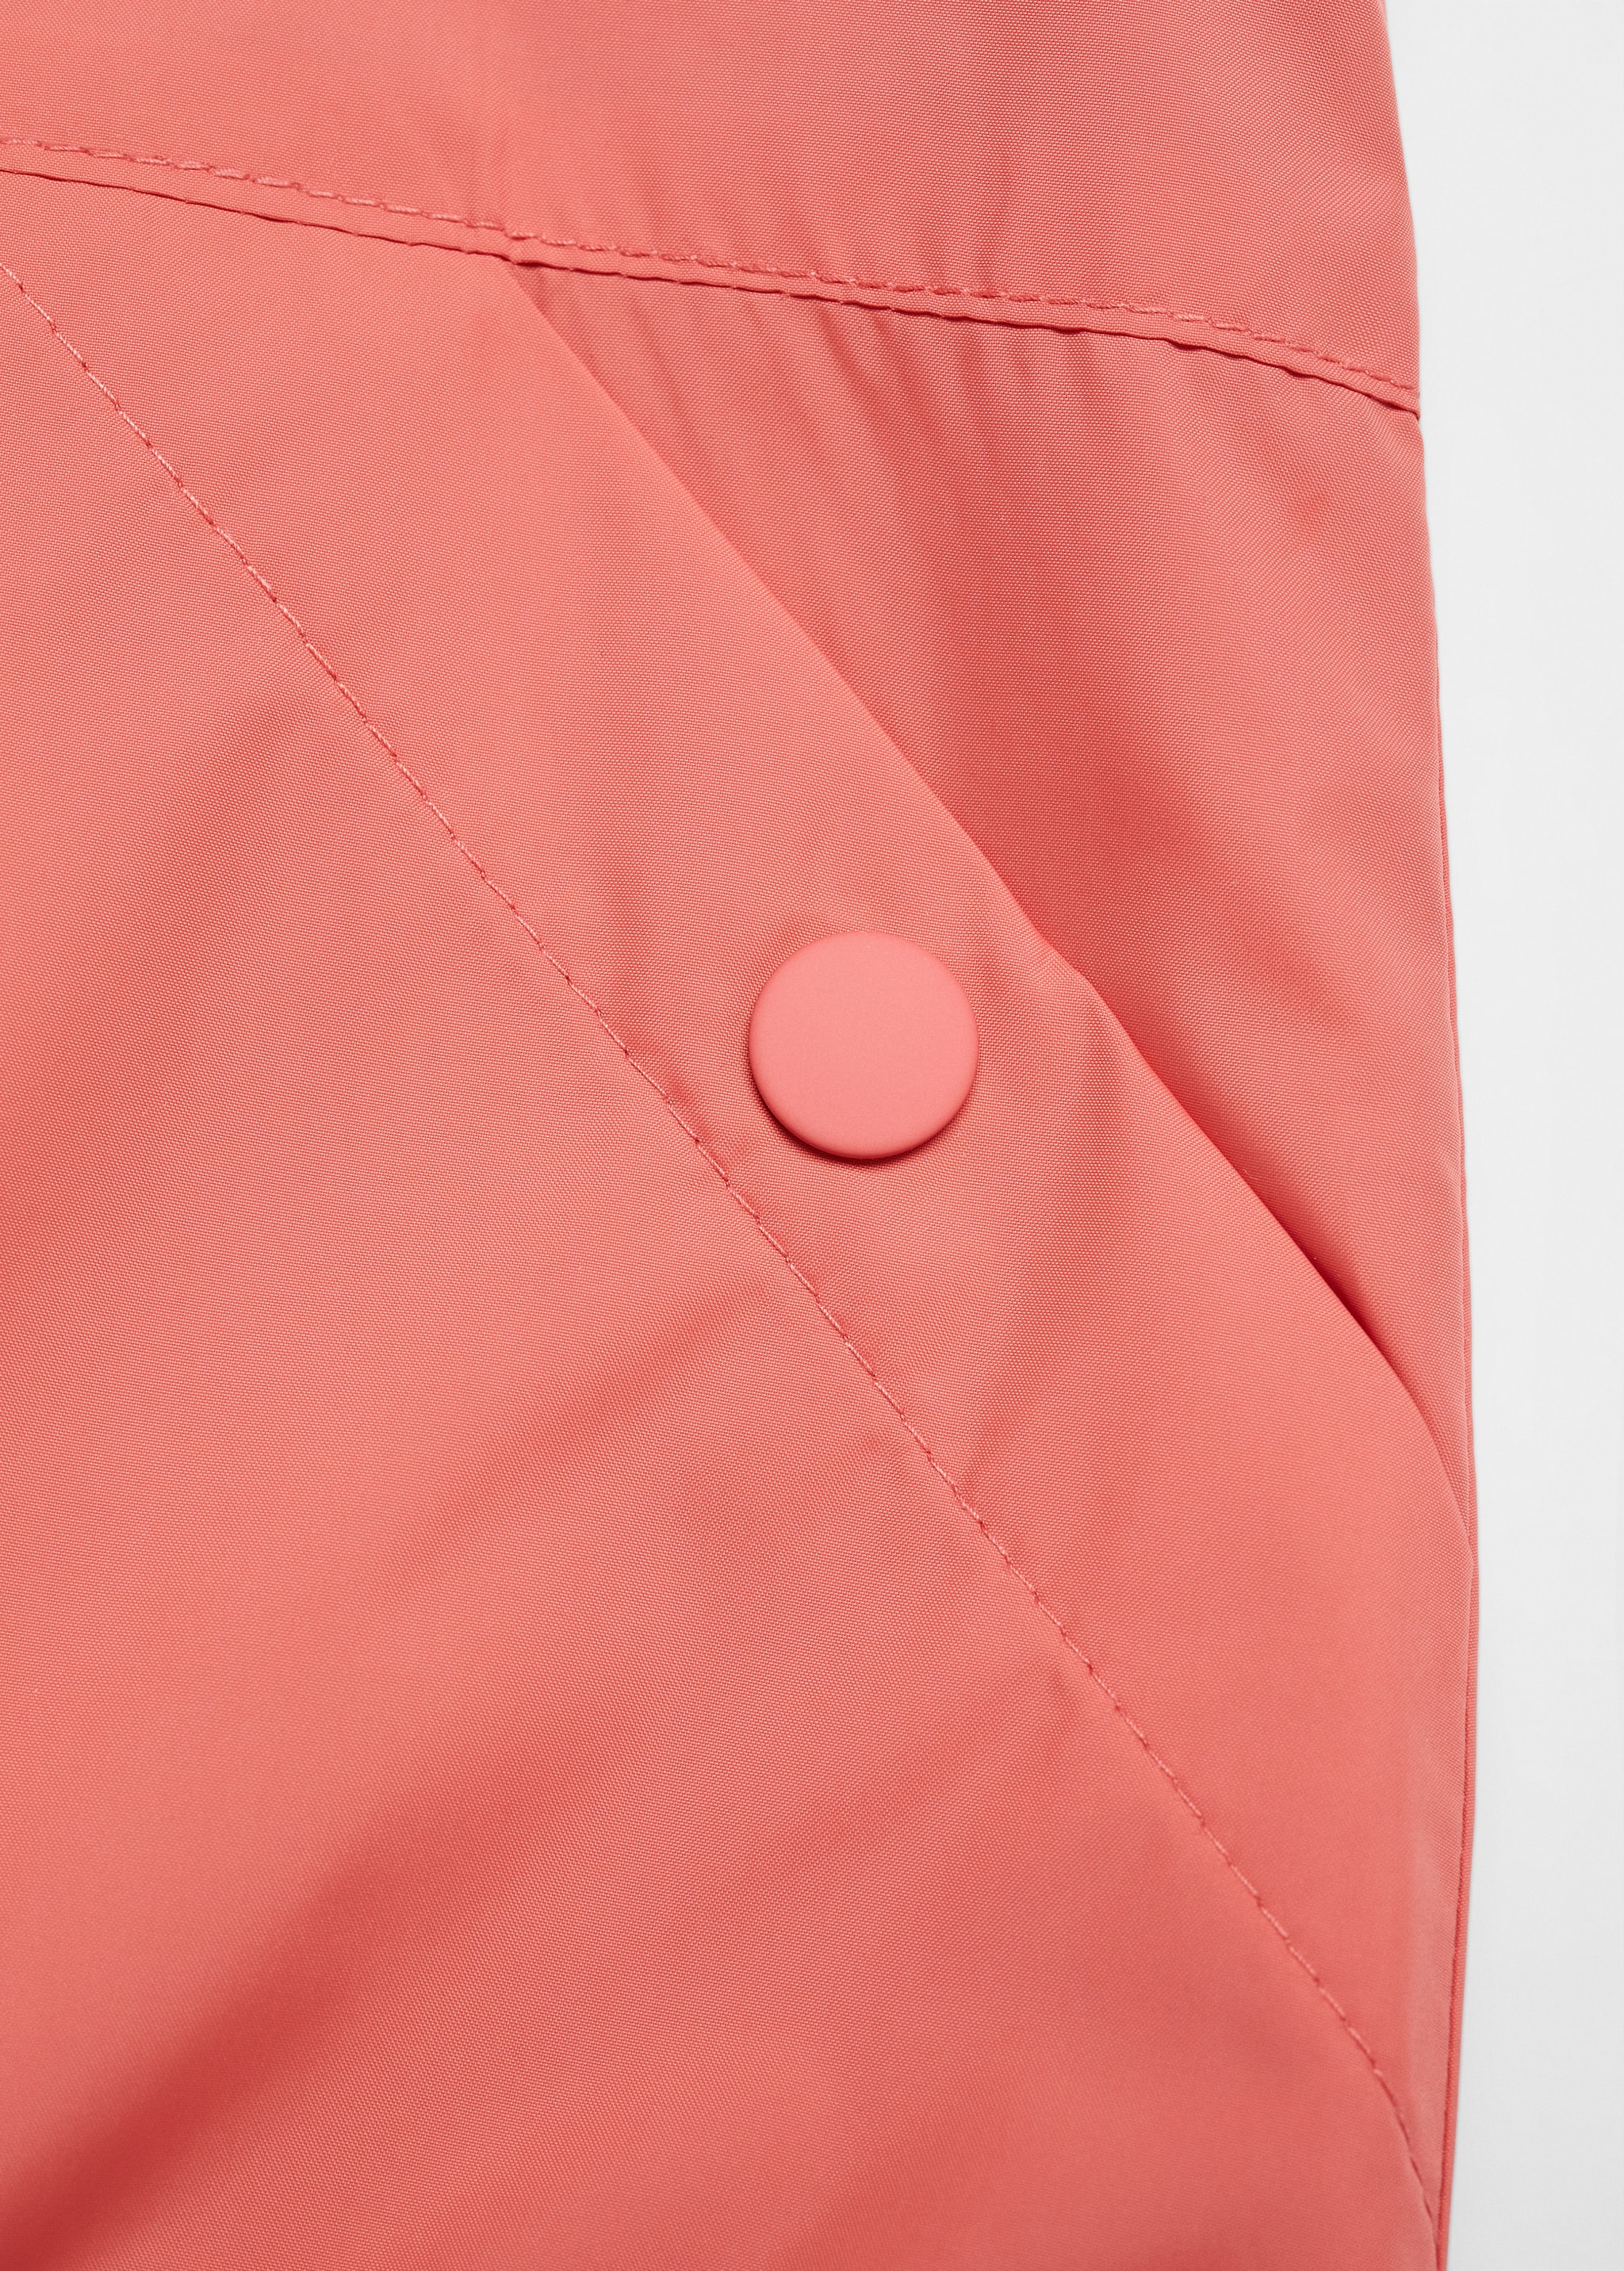 Hooded parka - Details of the article 0